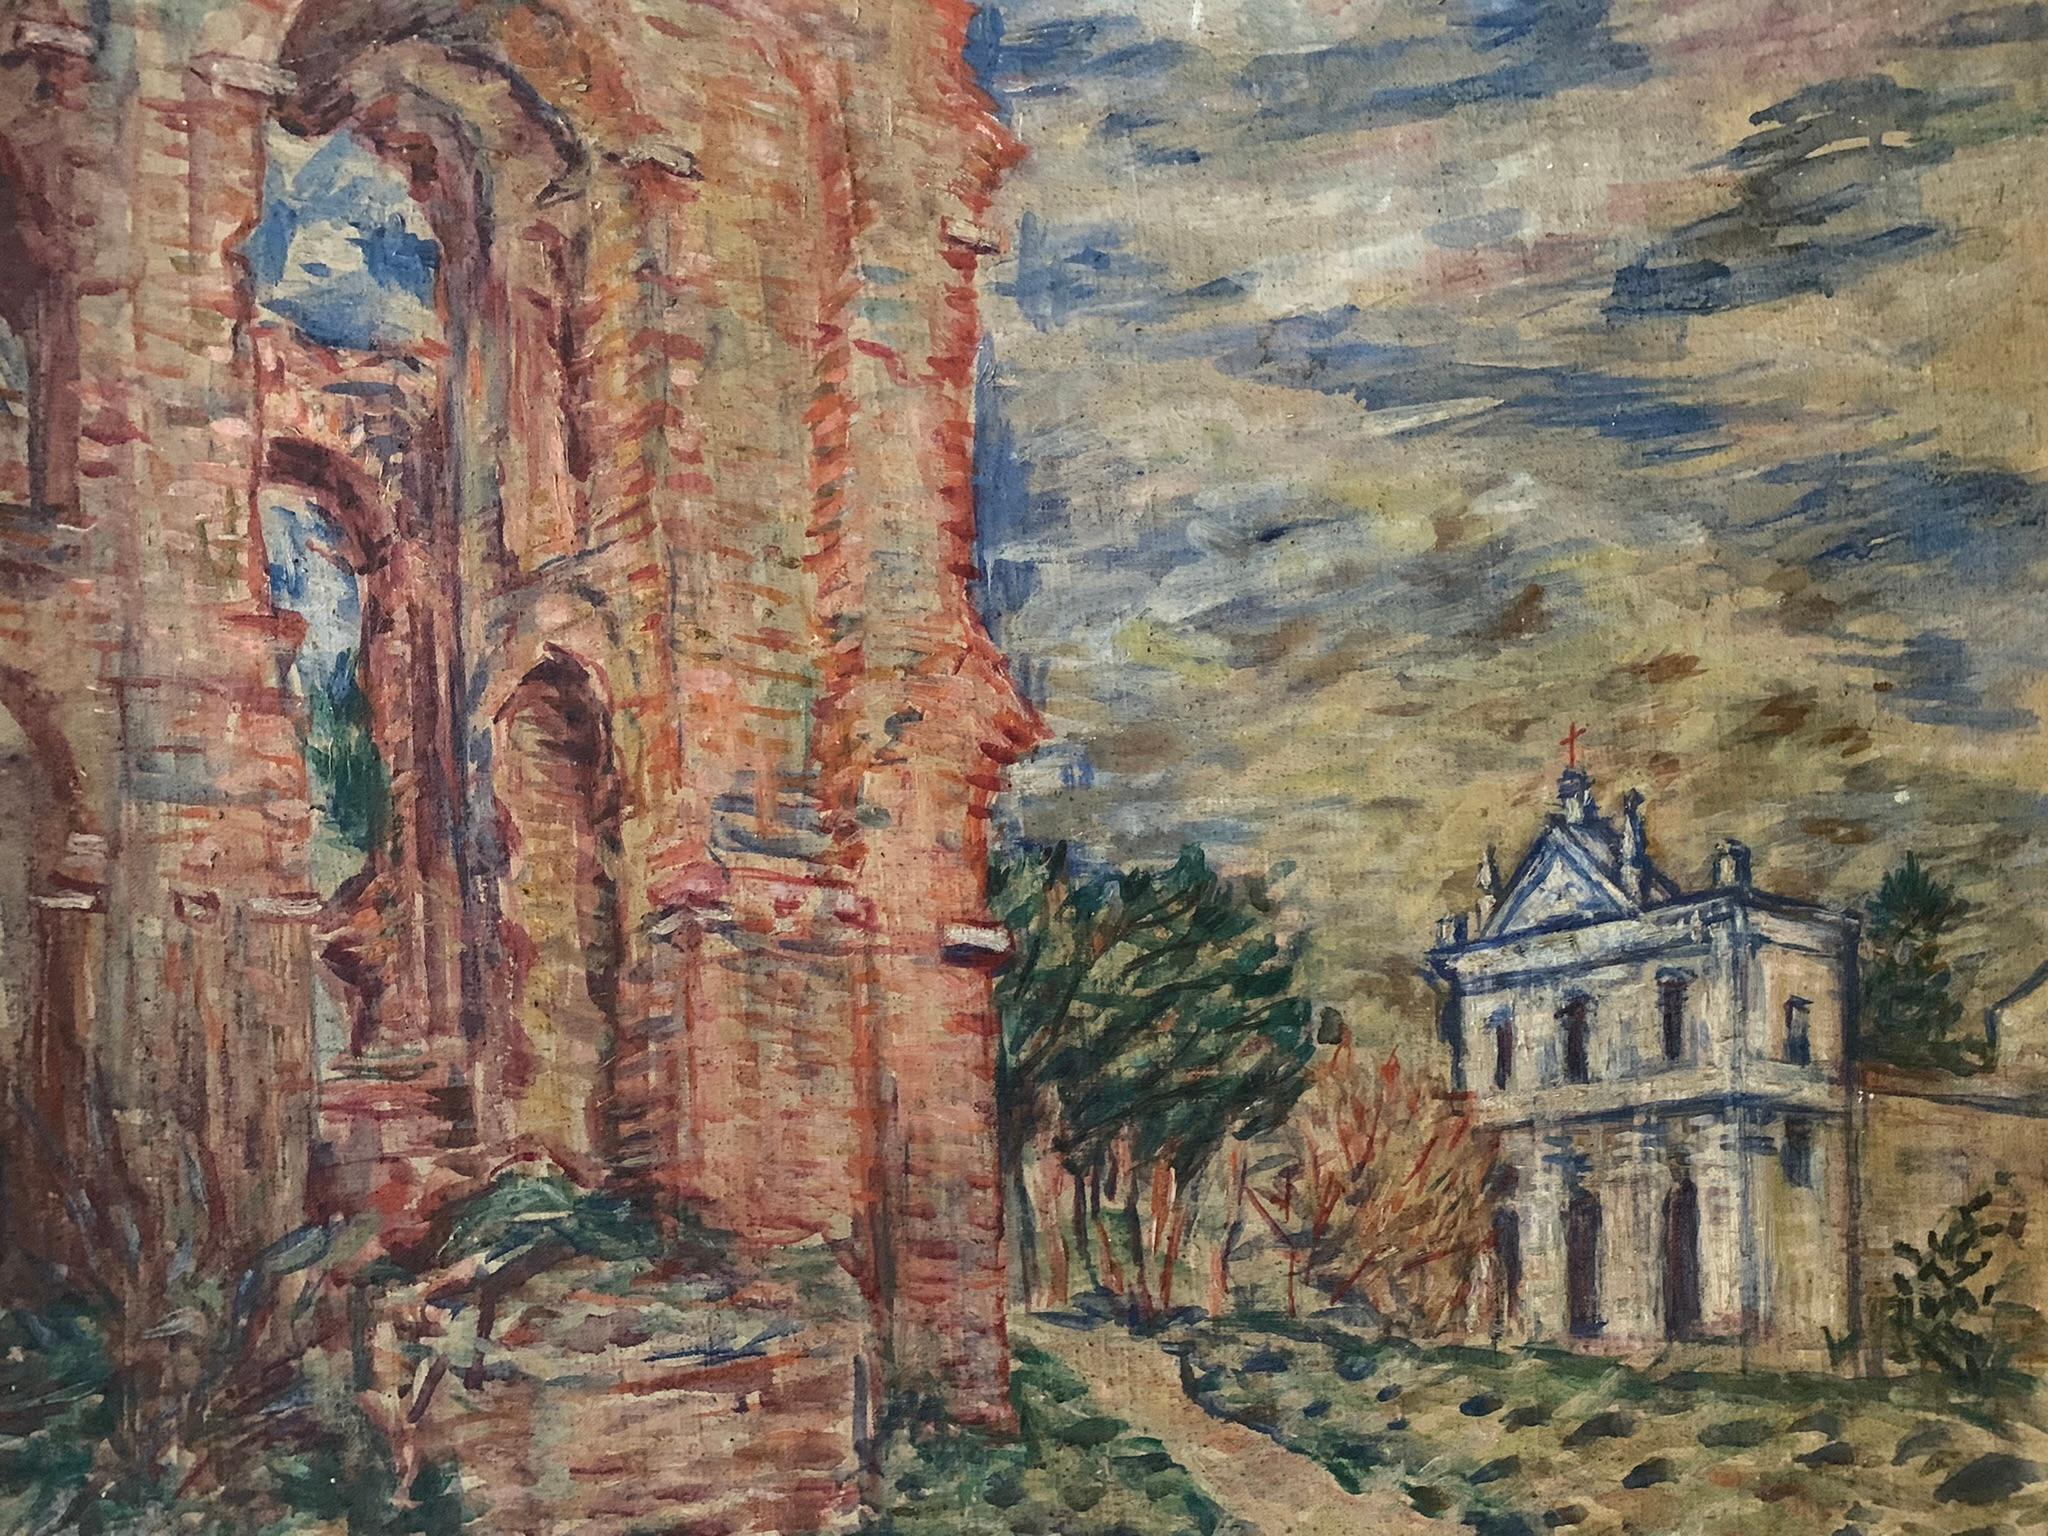 Rome 1937. Palatine Hill with Domus Severiana and church of San Gregorio. - Painting by Kurt Hinrichsen